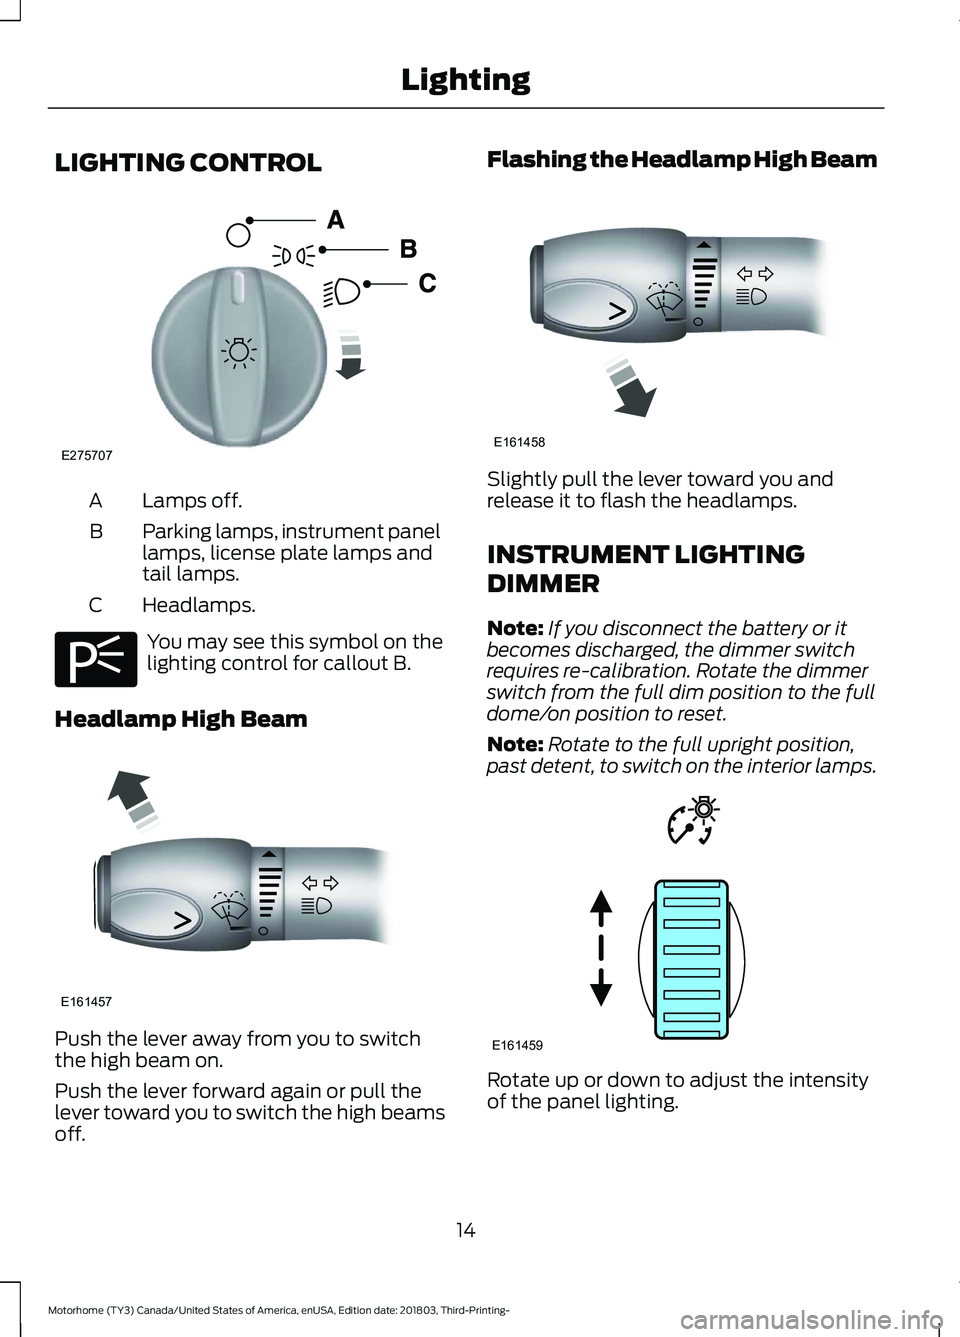 FORD F-53 2019 User Guide LIGHTING CONTROL
Lamps off.A
Parking lamps, instrument panellamps, license plate lamps andtail lamps.
B
Headlamps.C
You may see this symbol on thelighting control for callout B.
Headlamp High Beam
Pus